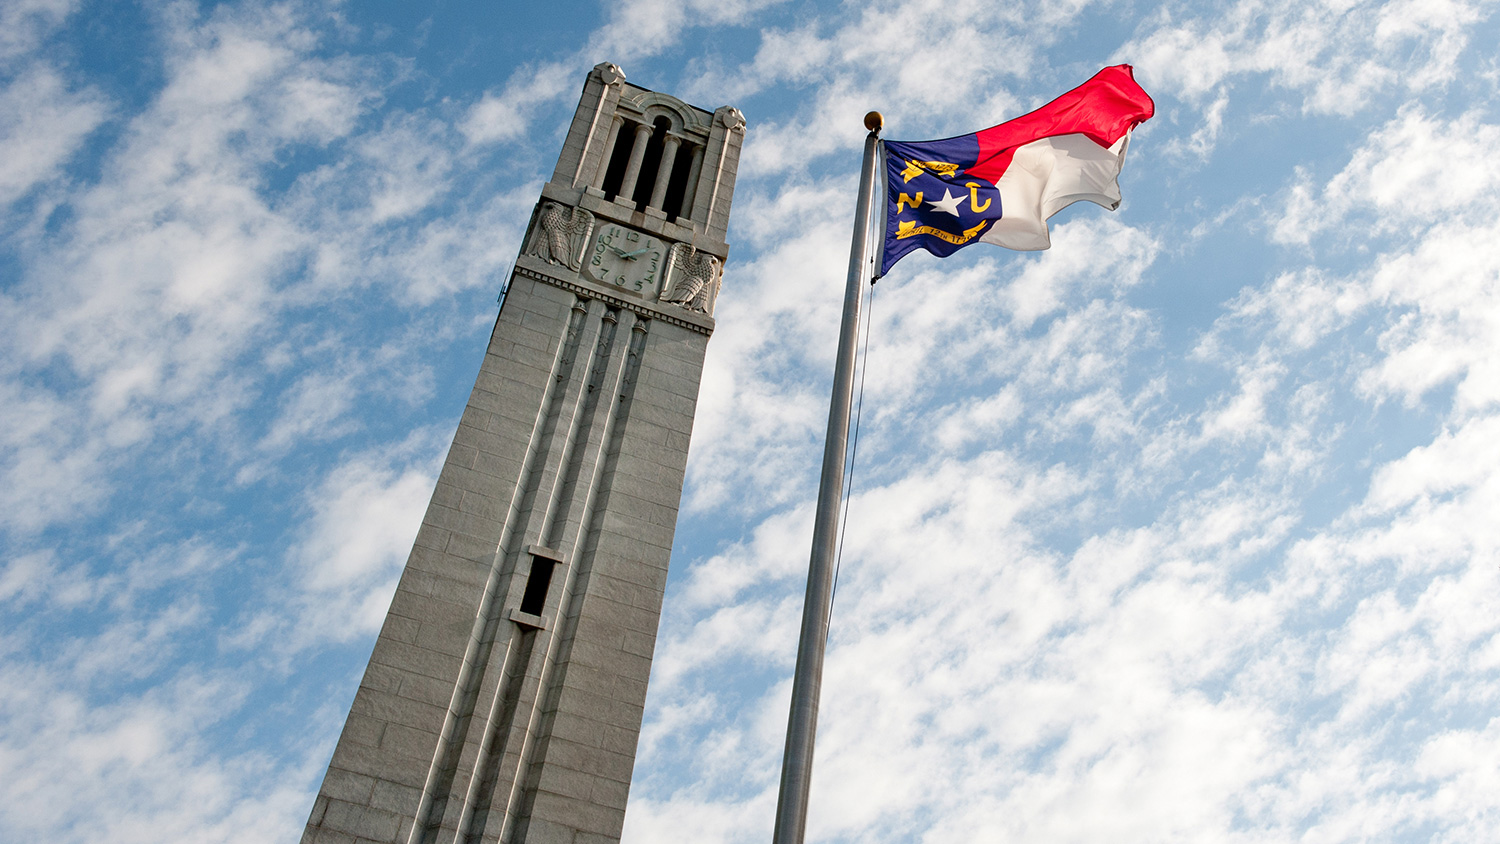 The NC state flag and the Memorial Belltower